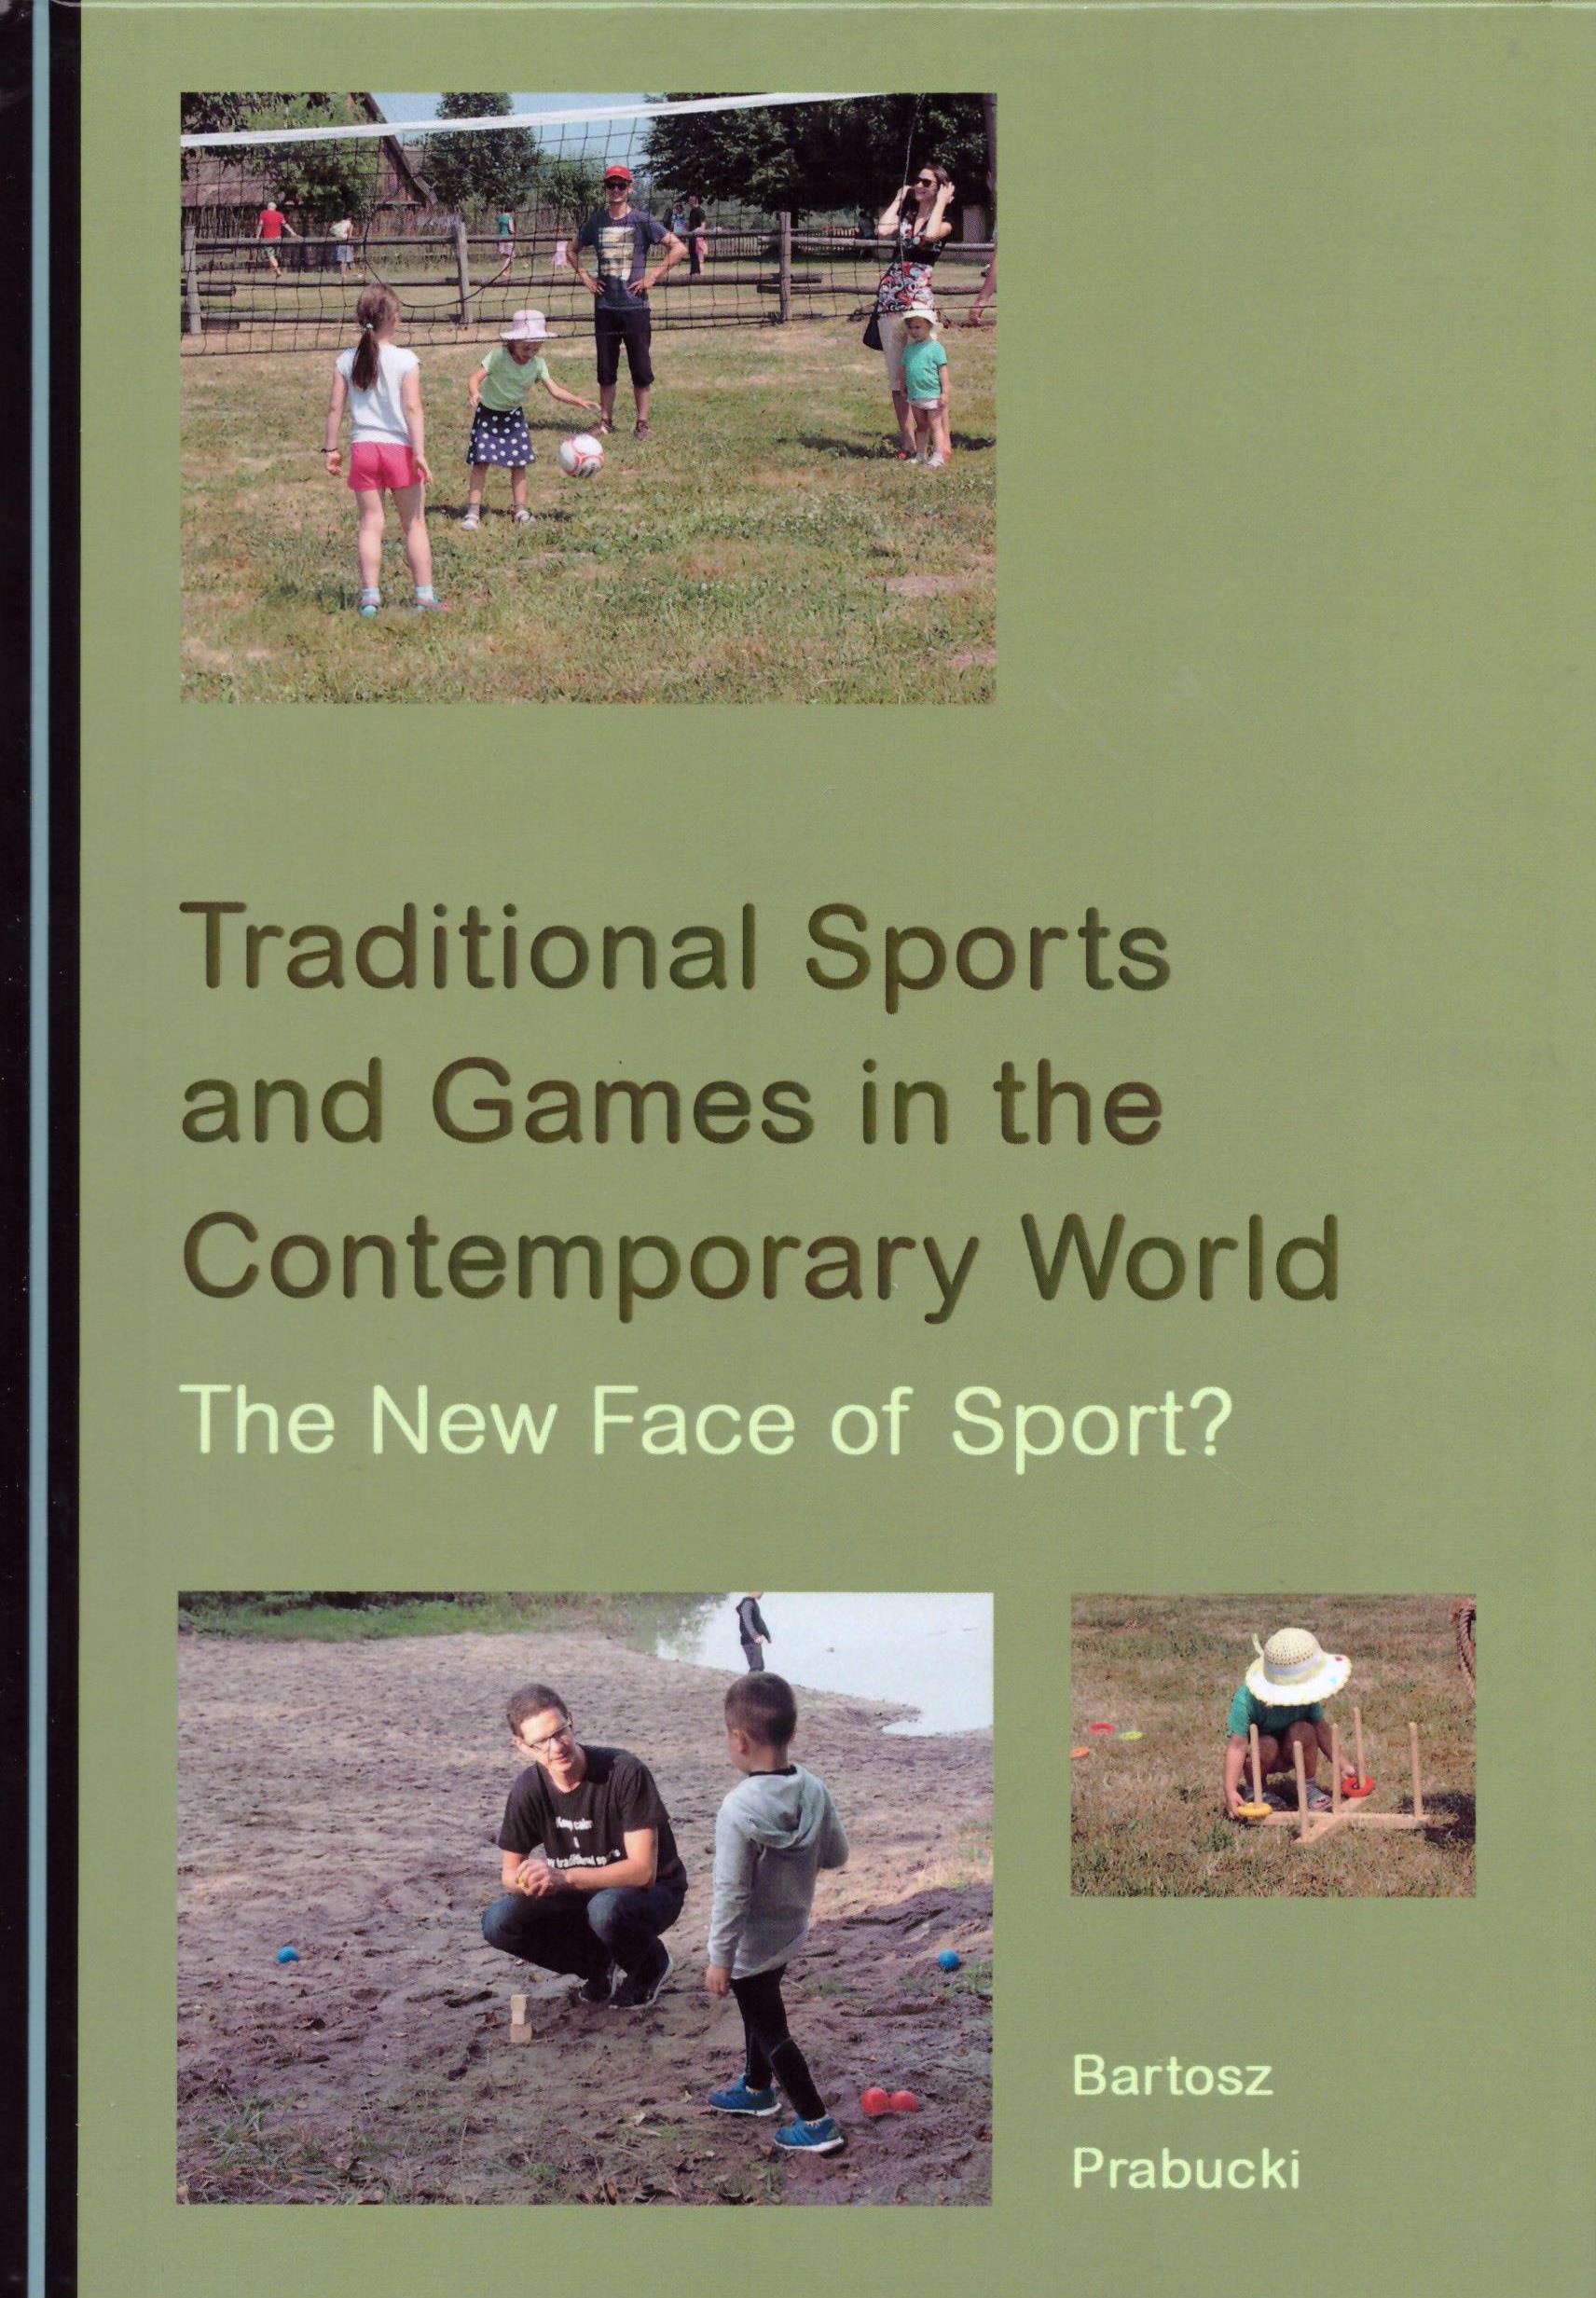 Bartosz Prabucki, Traditional Sports and Games in the Contemporary World: The New Face of Sport?